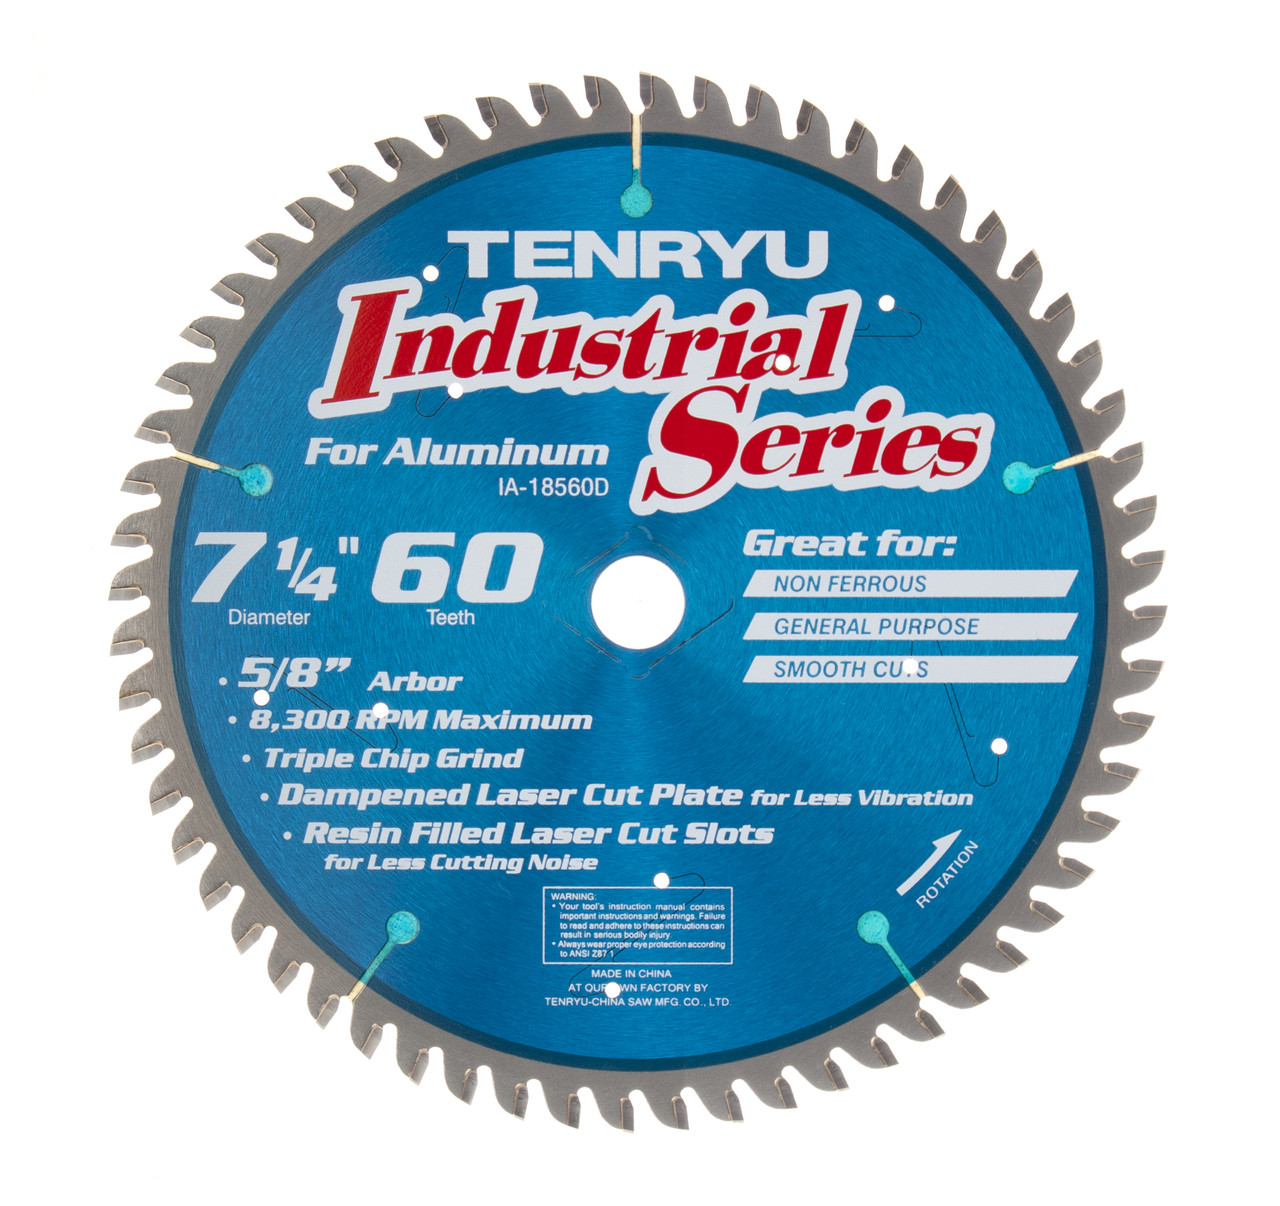 Industrial Blade for Non-Ferrous Saw Blade, 7-1/4